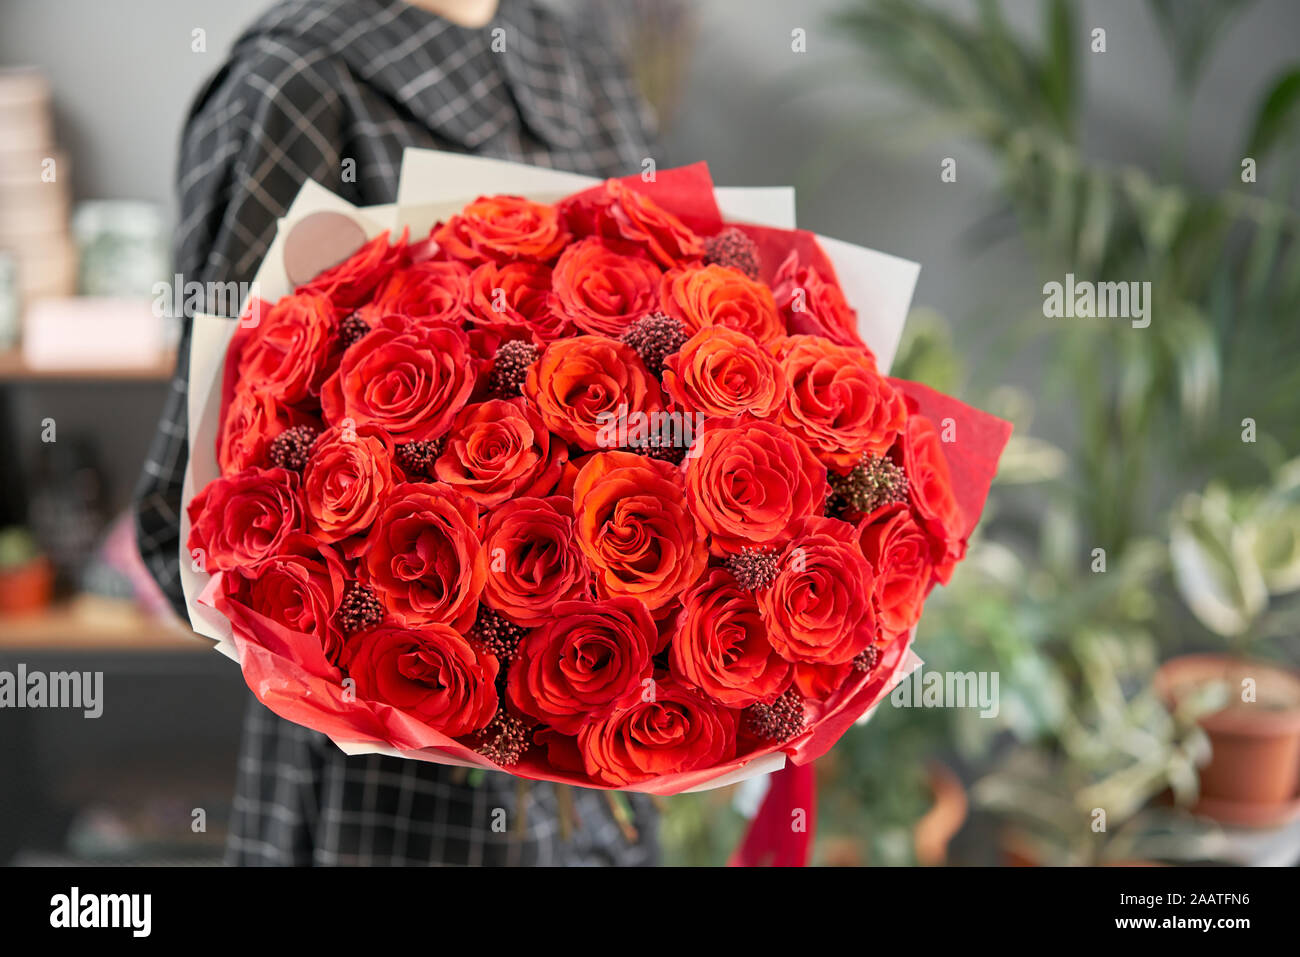 Mono bouquet of red roses in womans hands. European floral shop. the work of the florist at a flower shop. Delivery fresh cut flower. Stock Photo